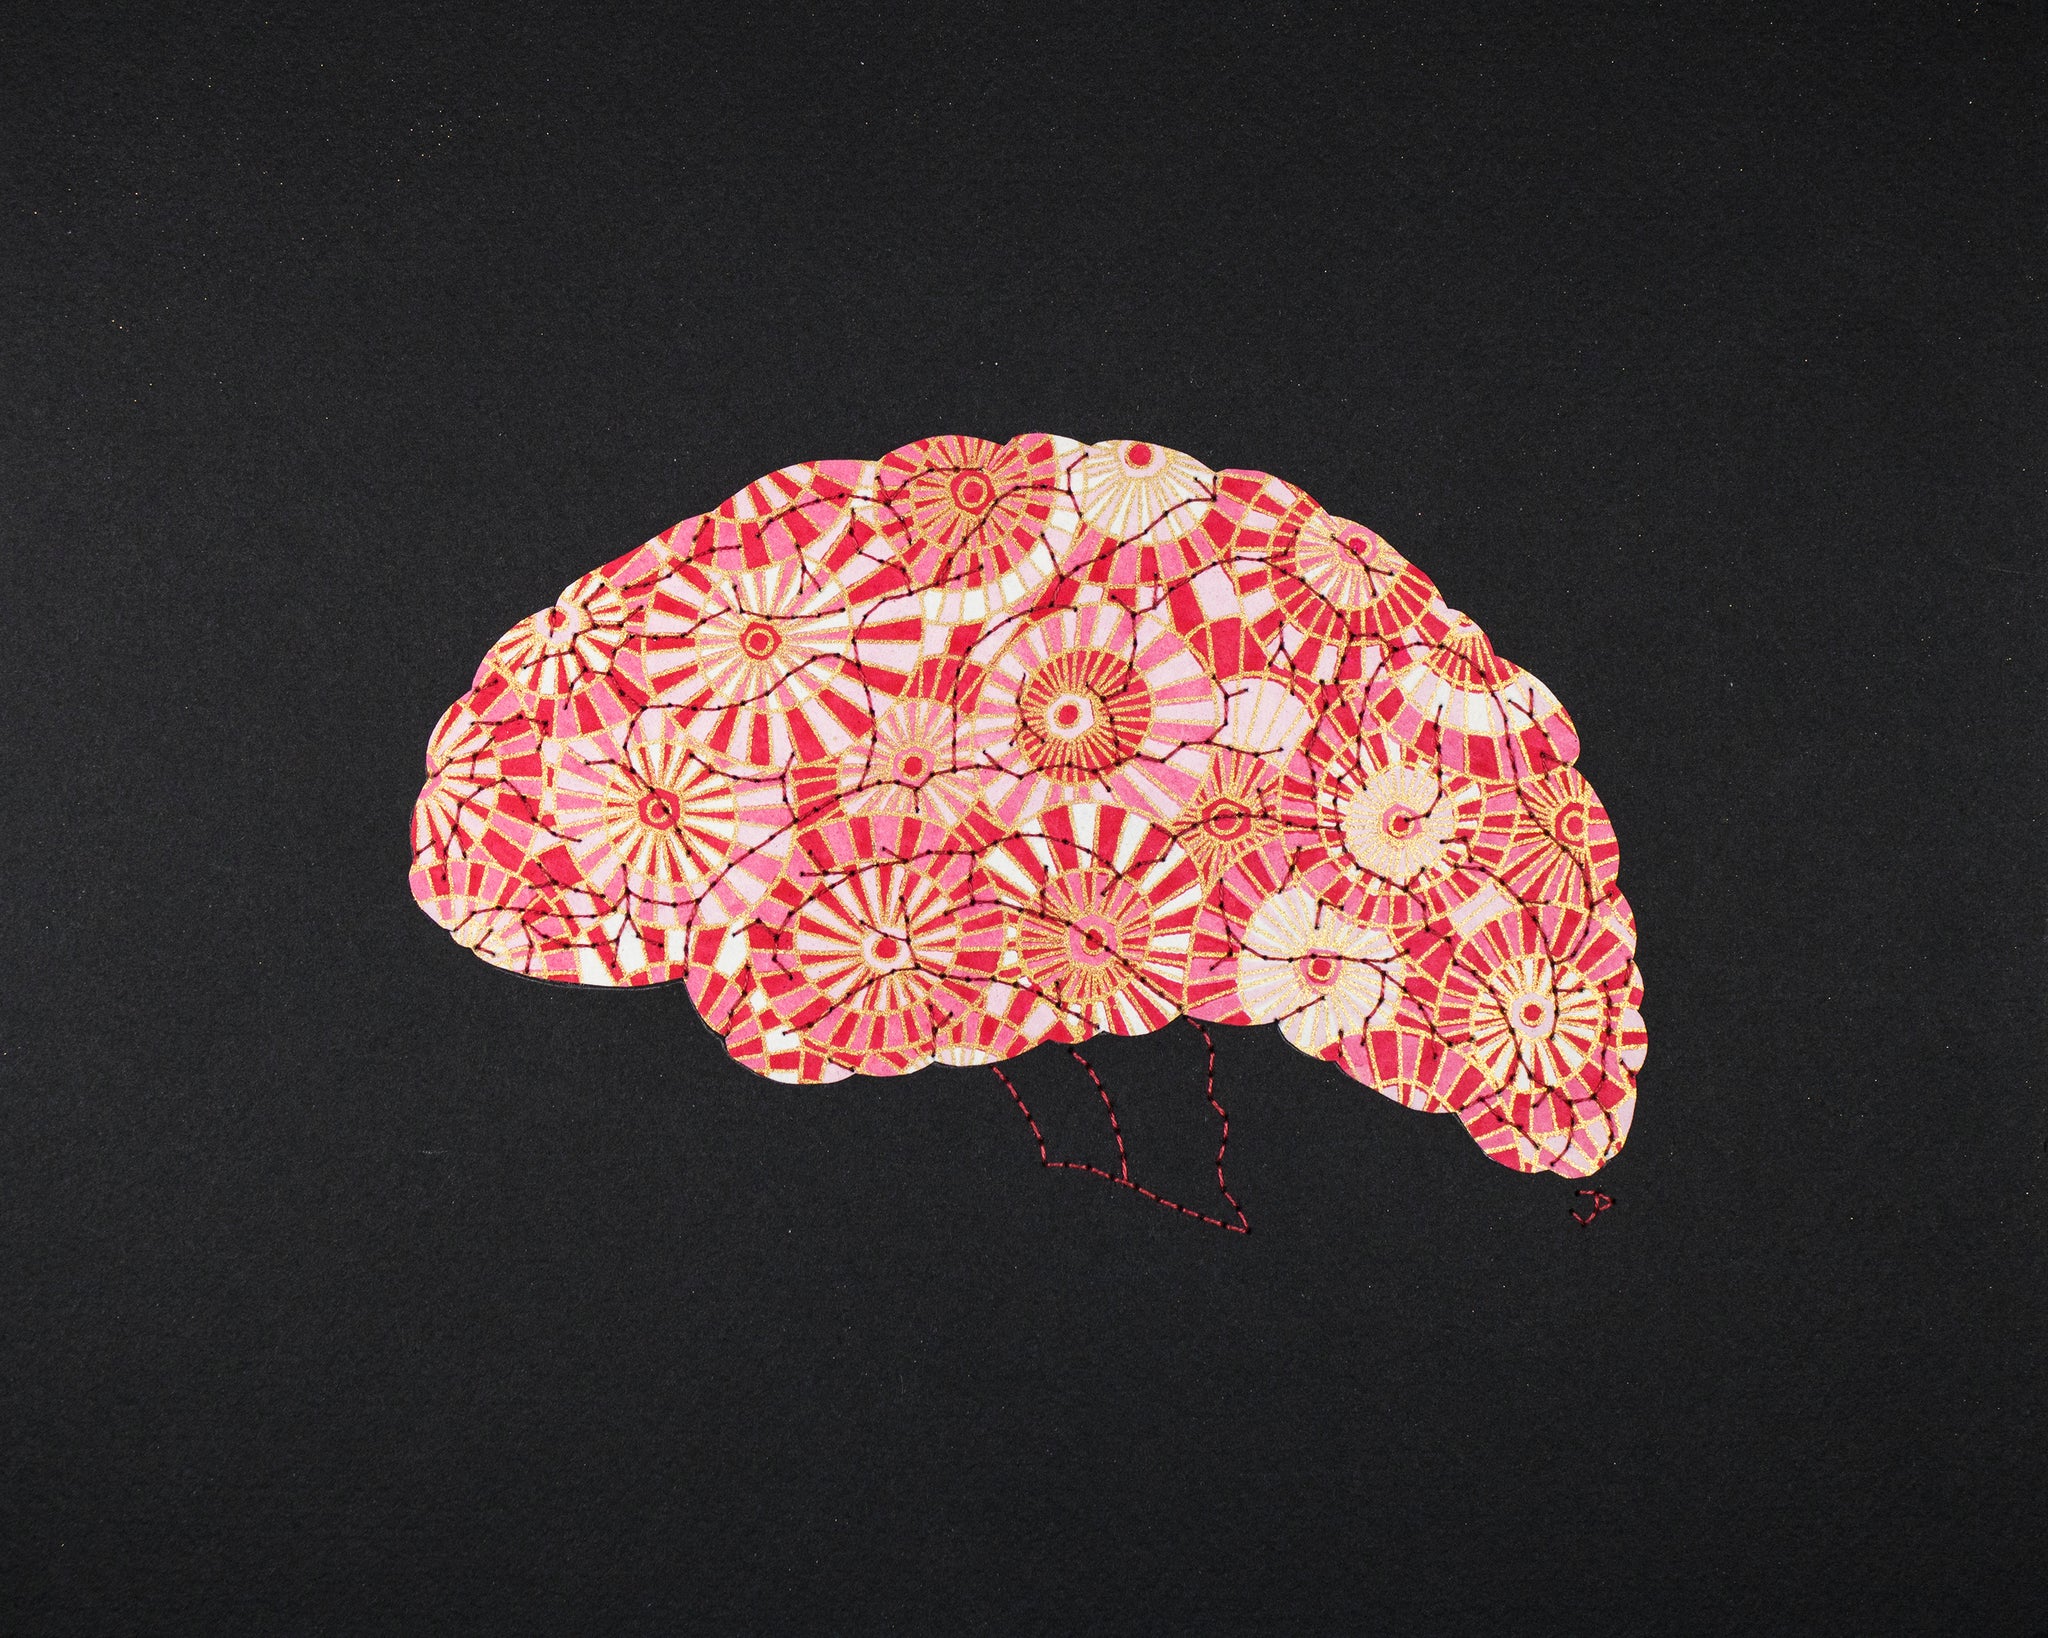 Brain in red, pink & gold wheels